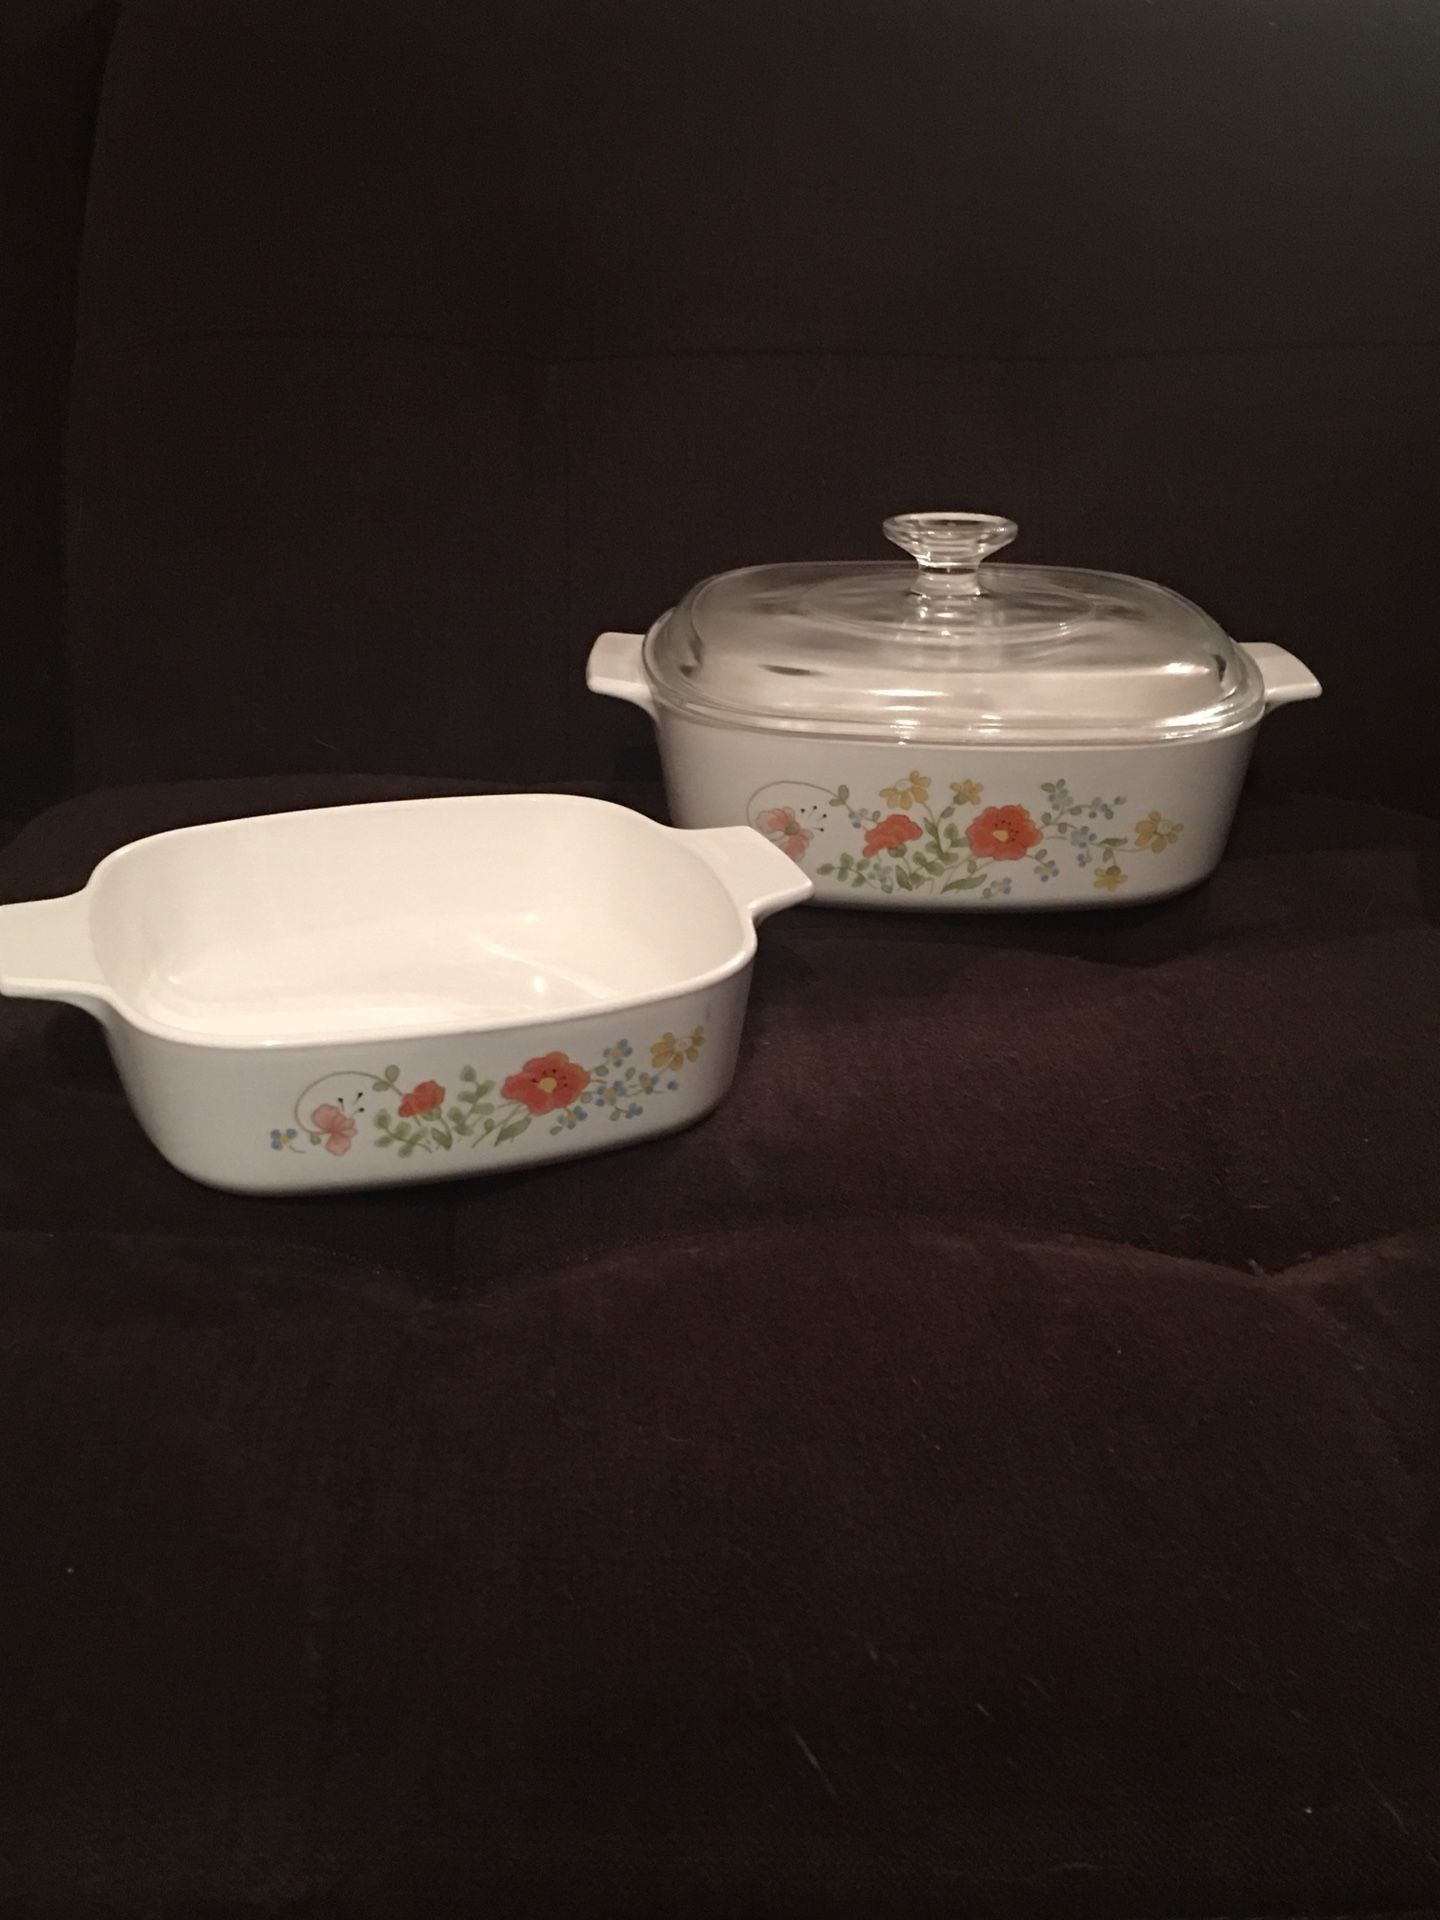 3 Pieces of CorningWare in Wildflower Pattern—Includes Dish w/ Pyrex Glass Lid